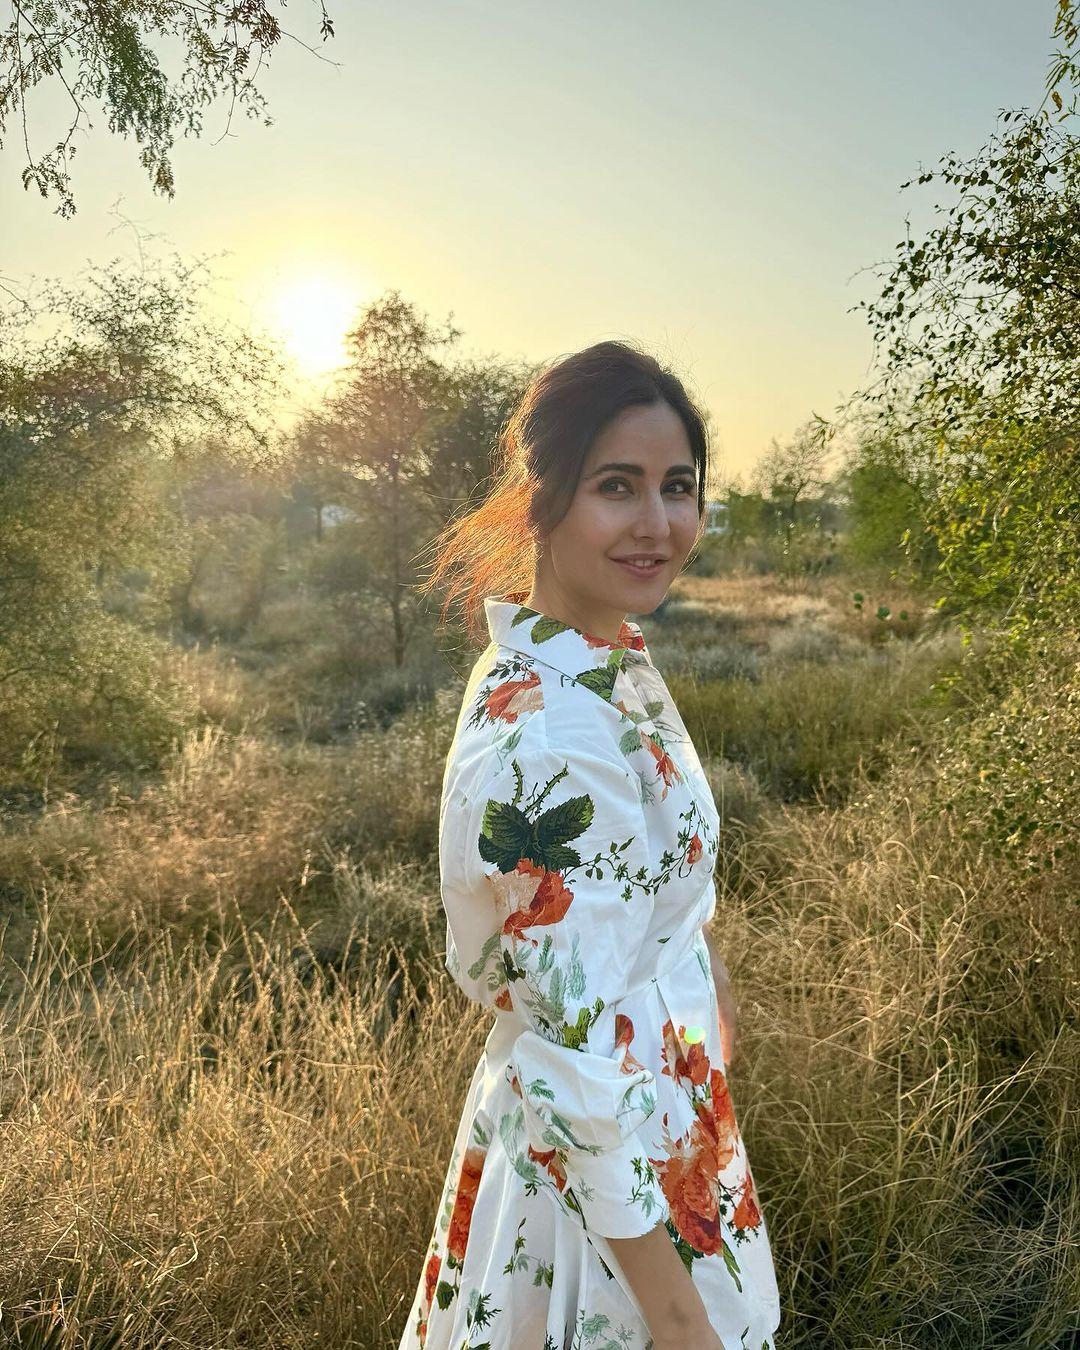 Katrina looks super cute with her hair tied in a messy bun as she poses in front of some bushes